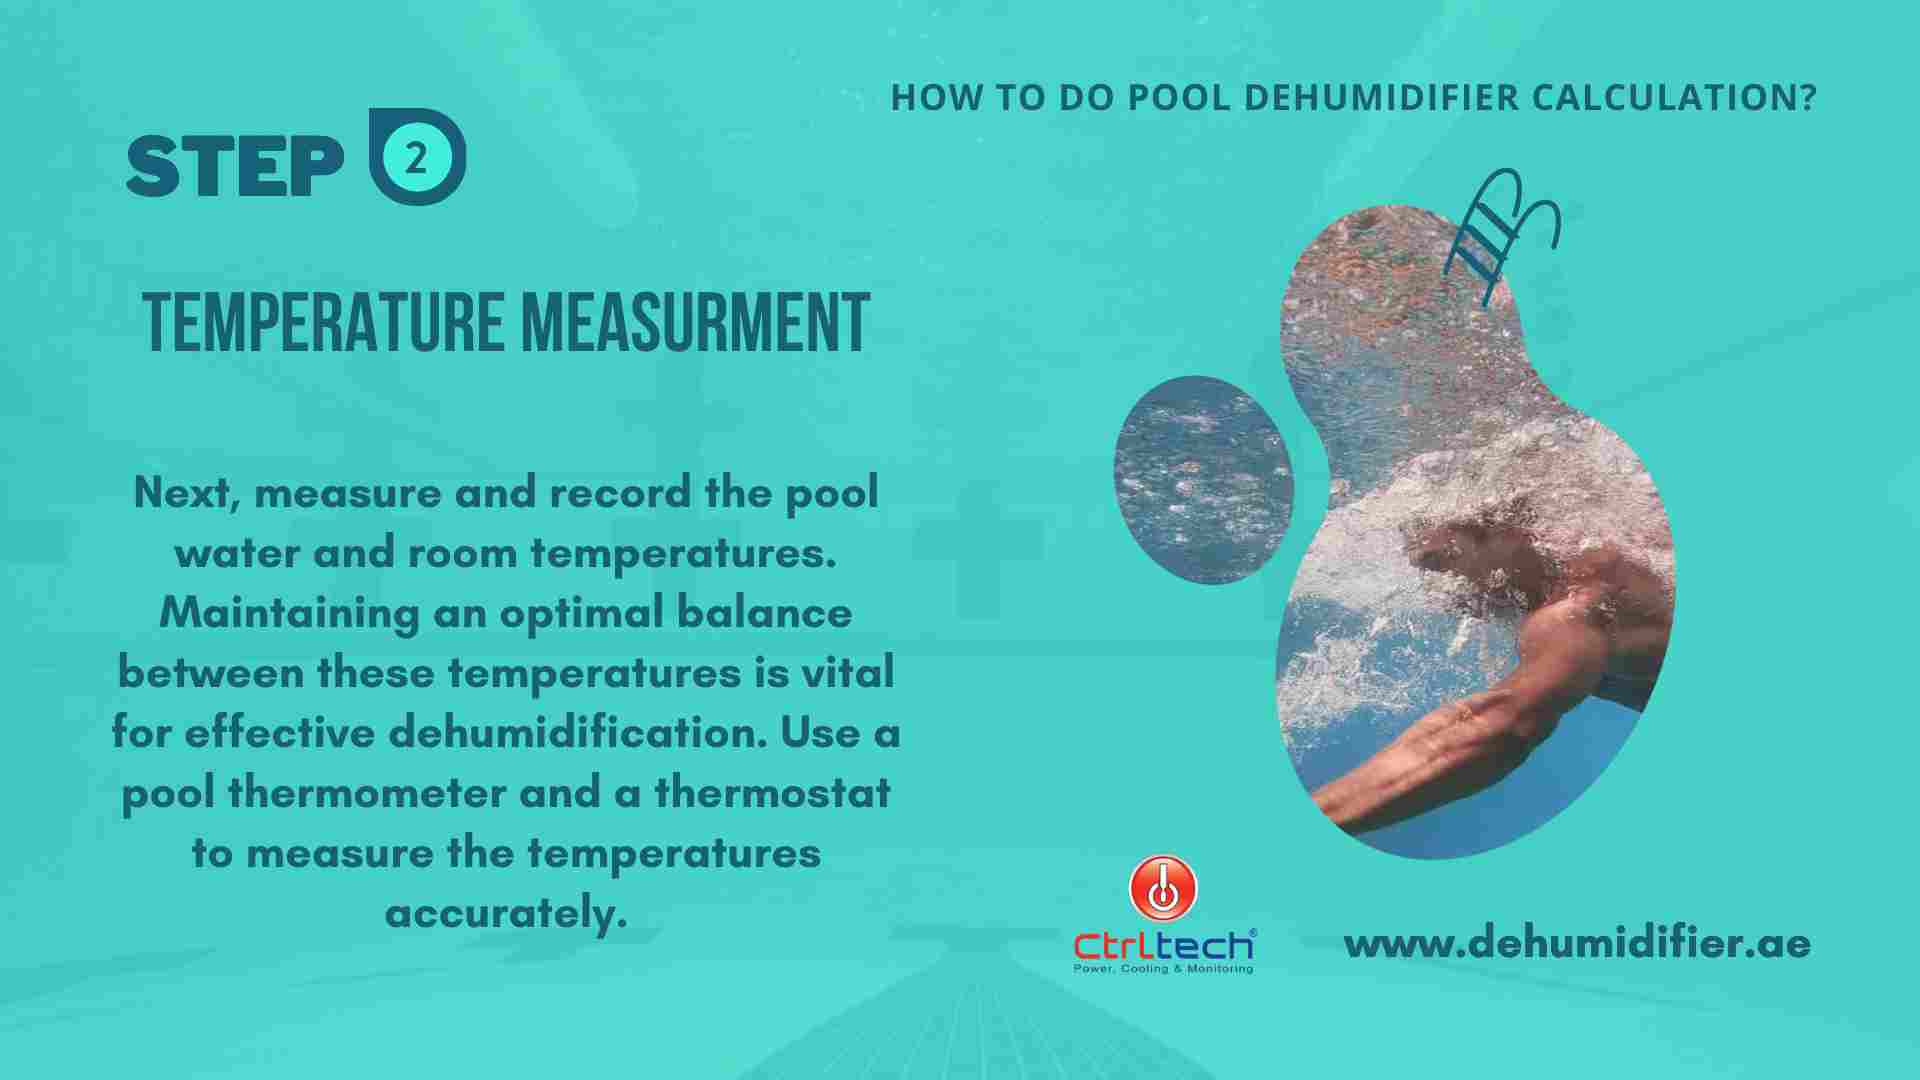 Step 2 Temperatures reading to use in pool dehumidifier calculator